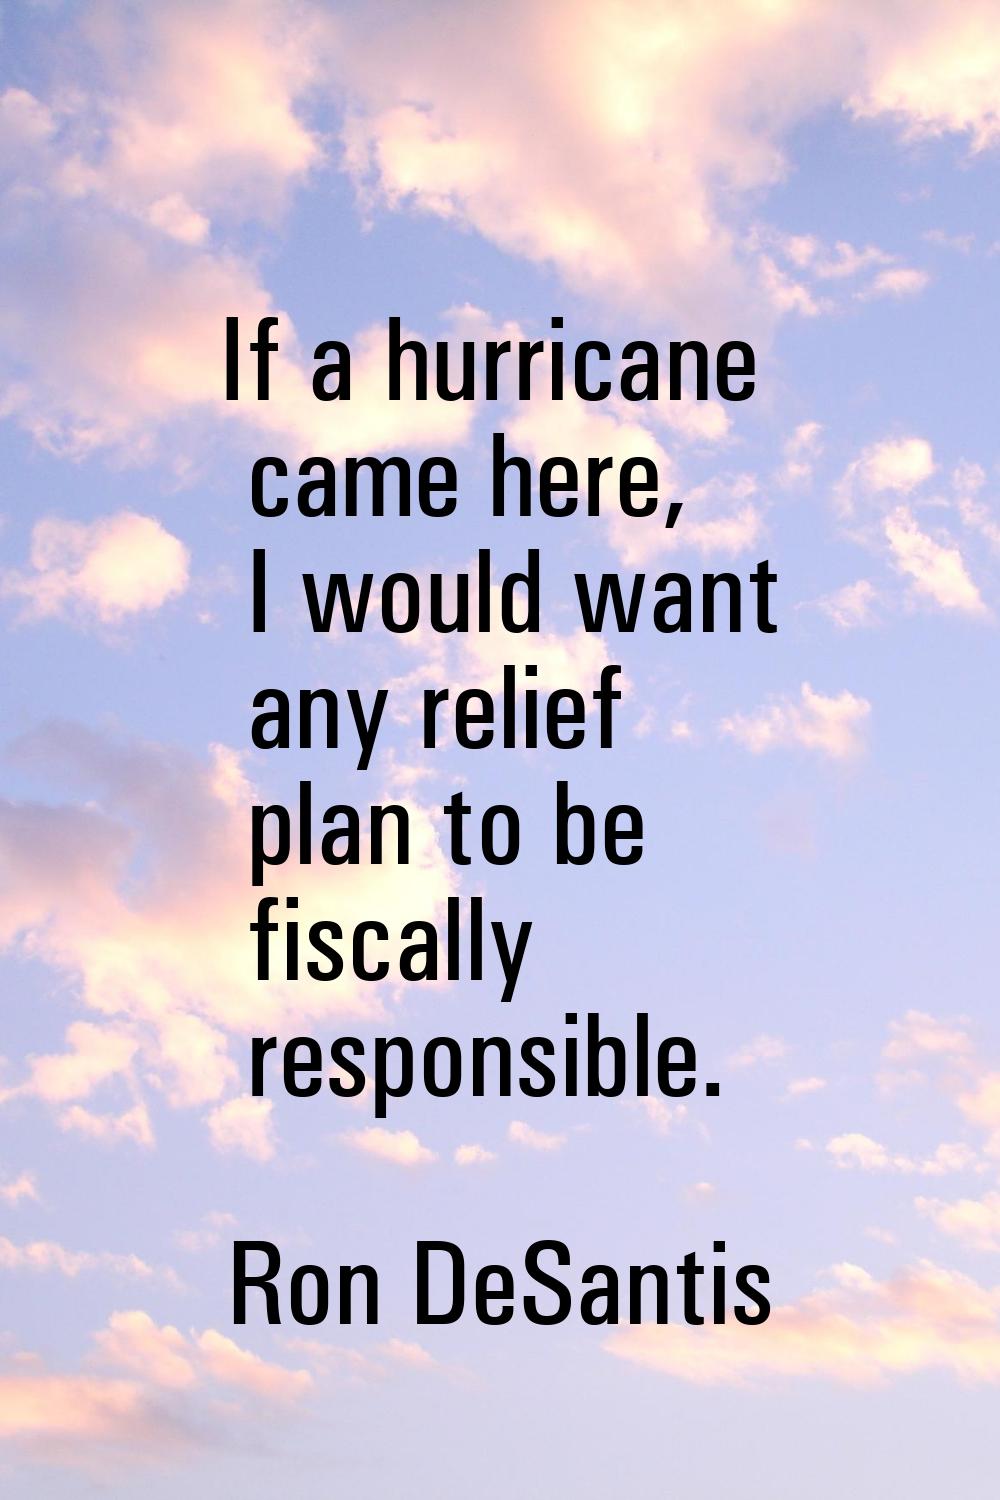 If a hurricane came here, I would want any relief plan to be fiscally responsible.